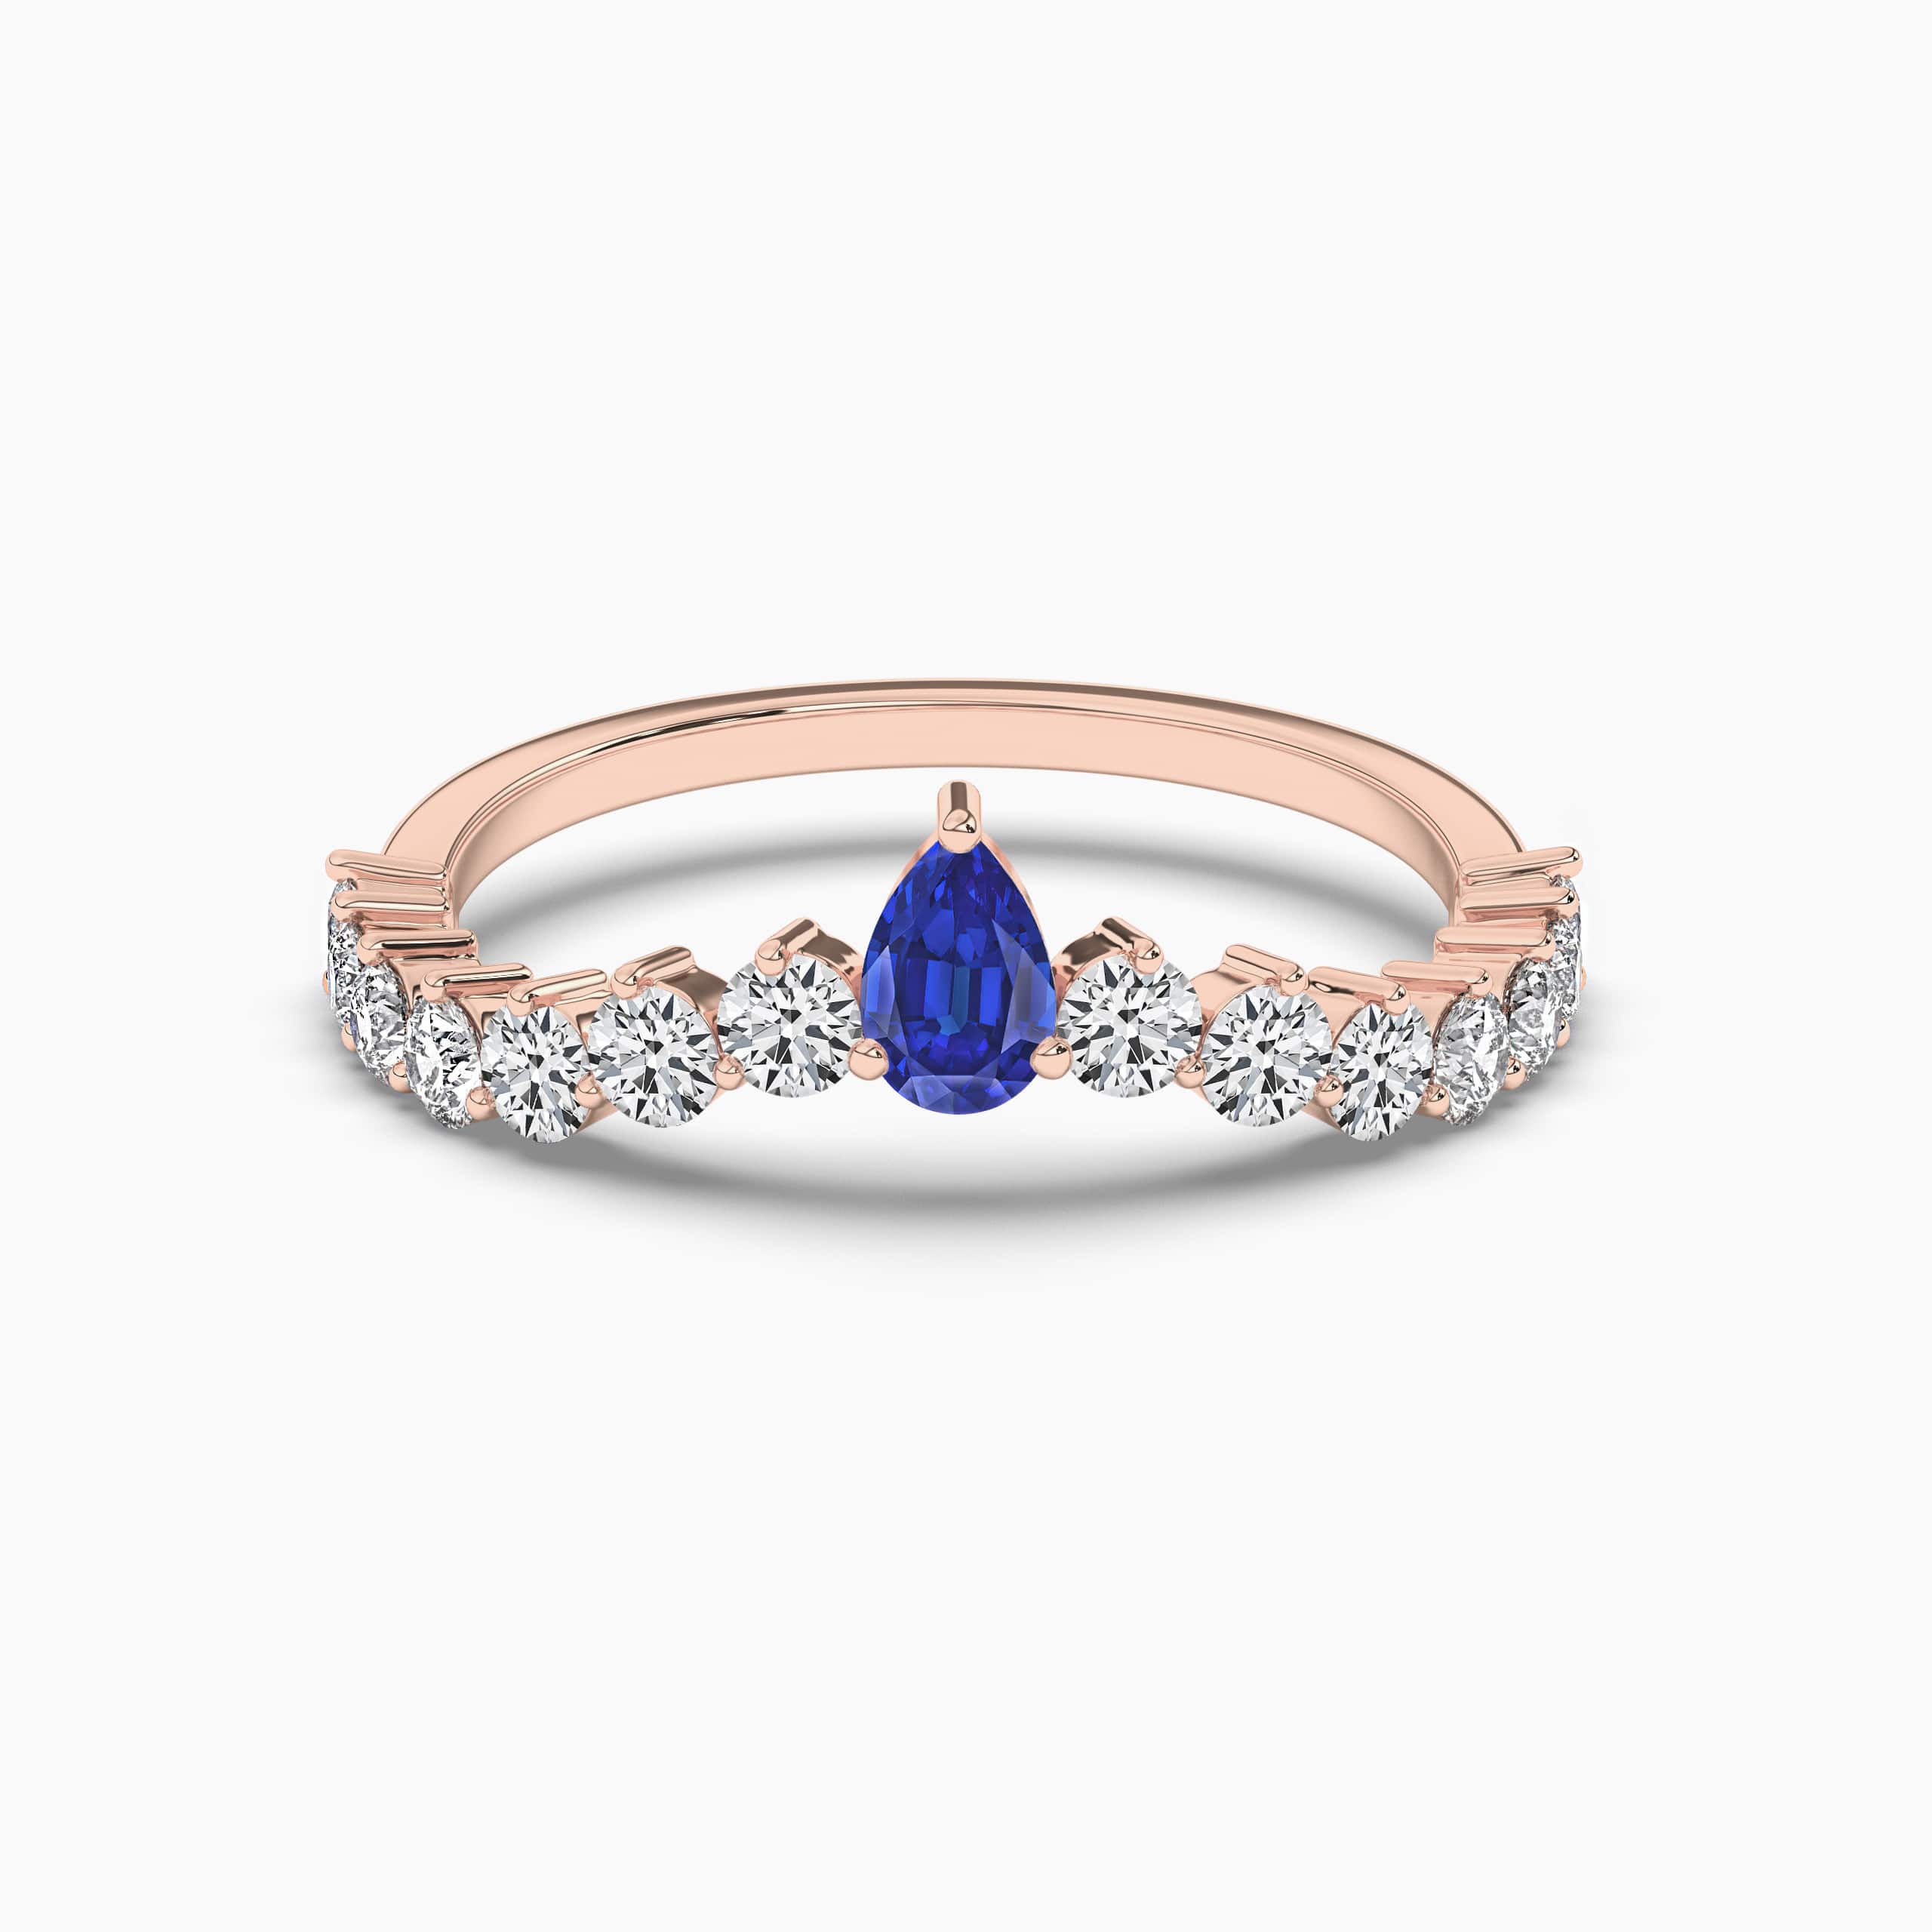 Pear shape Blue Sapphire Halo Engagement Ring with Diamonds